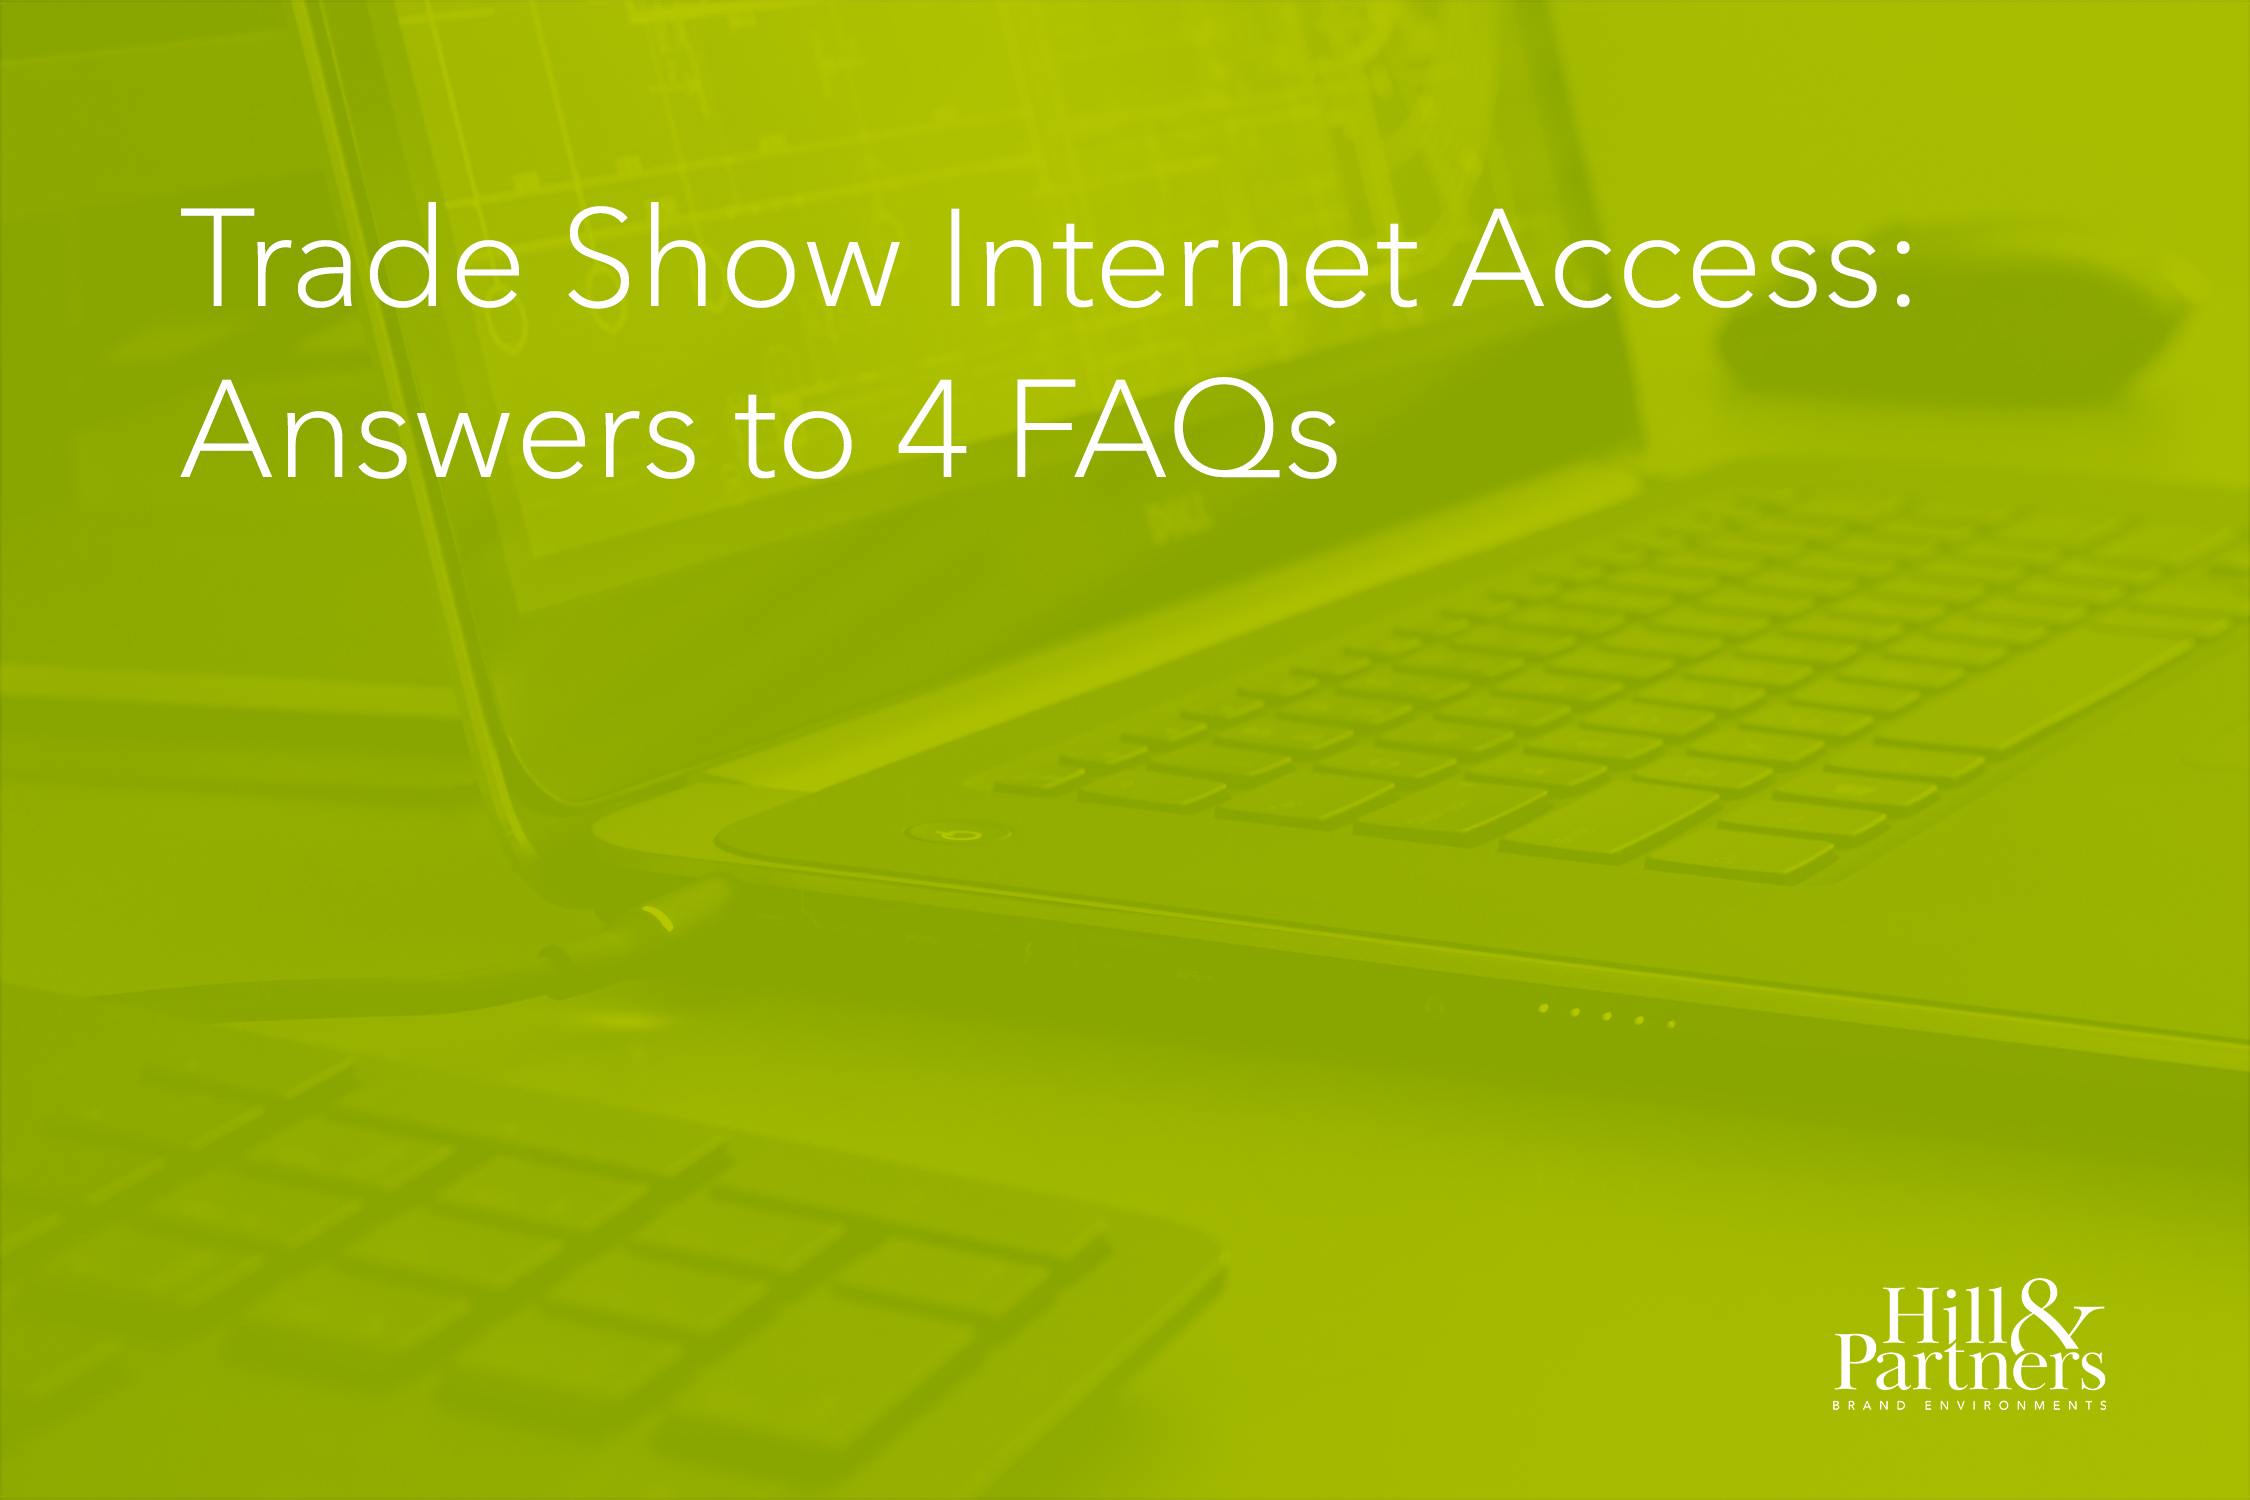 Trade Show Internet Access: Answers To 4 FAQs